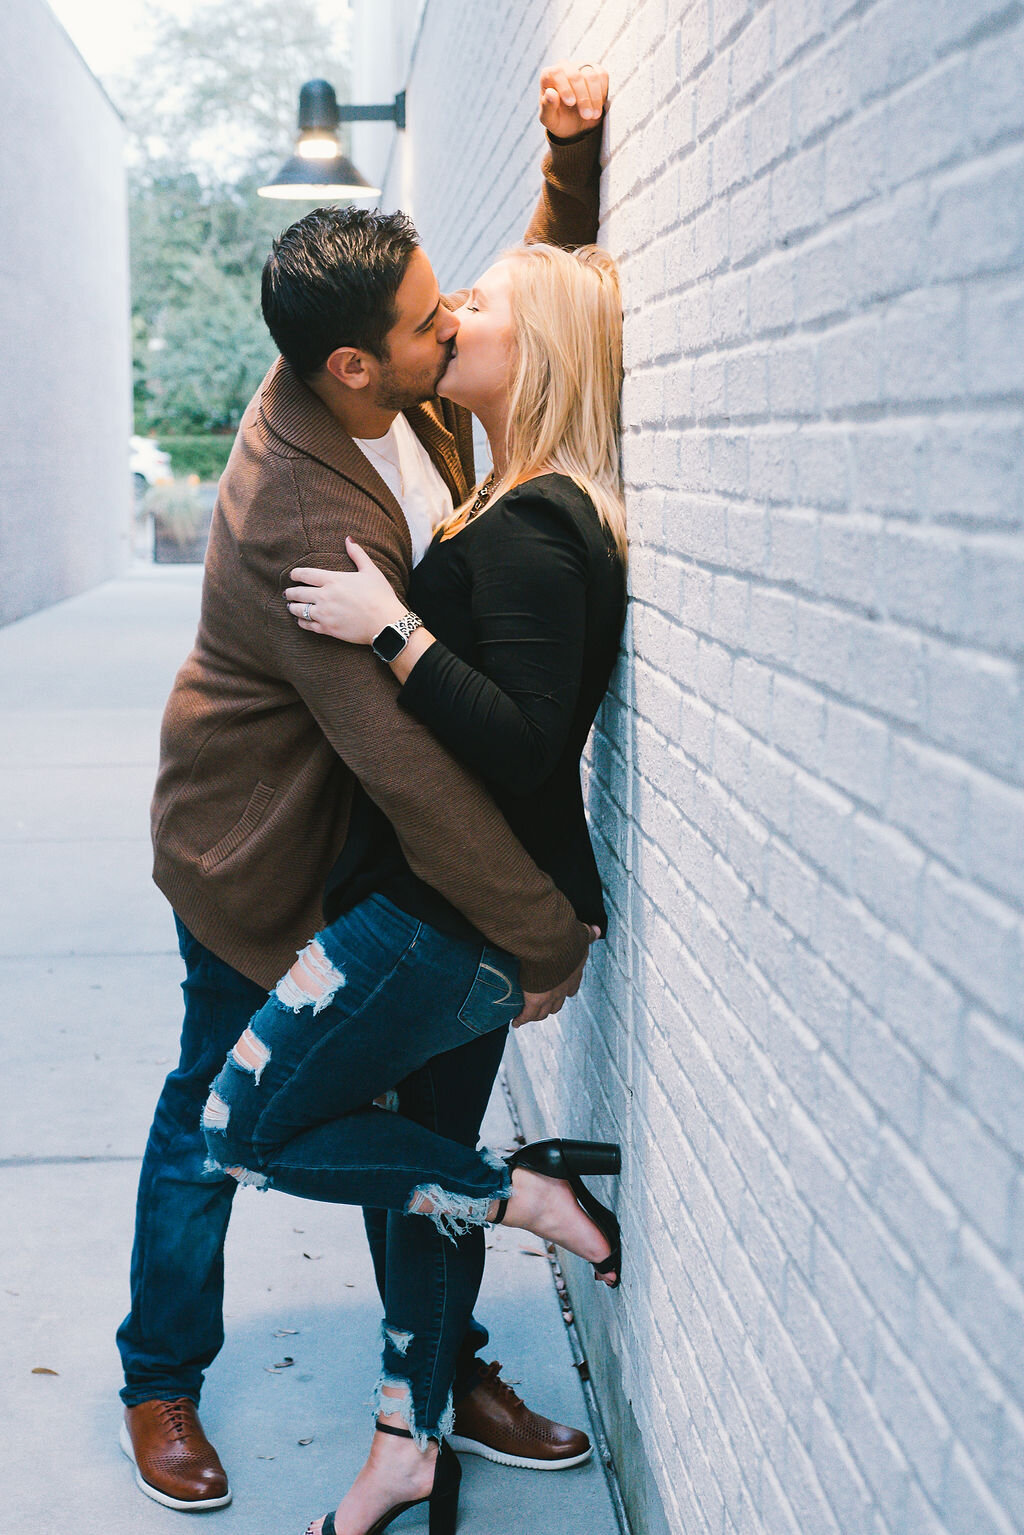 fun-engagement-picture-ideas, fun-engagement-photos, engagement-photography, kissing-engagement-pictures